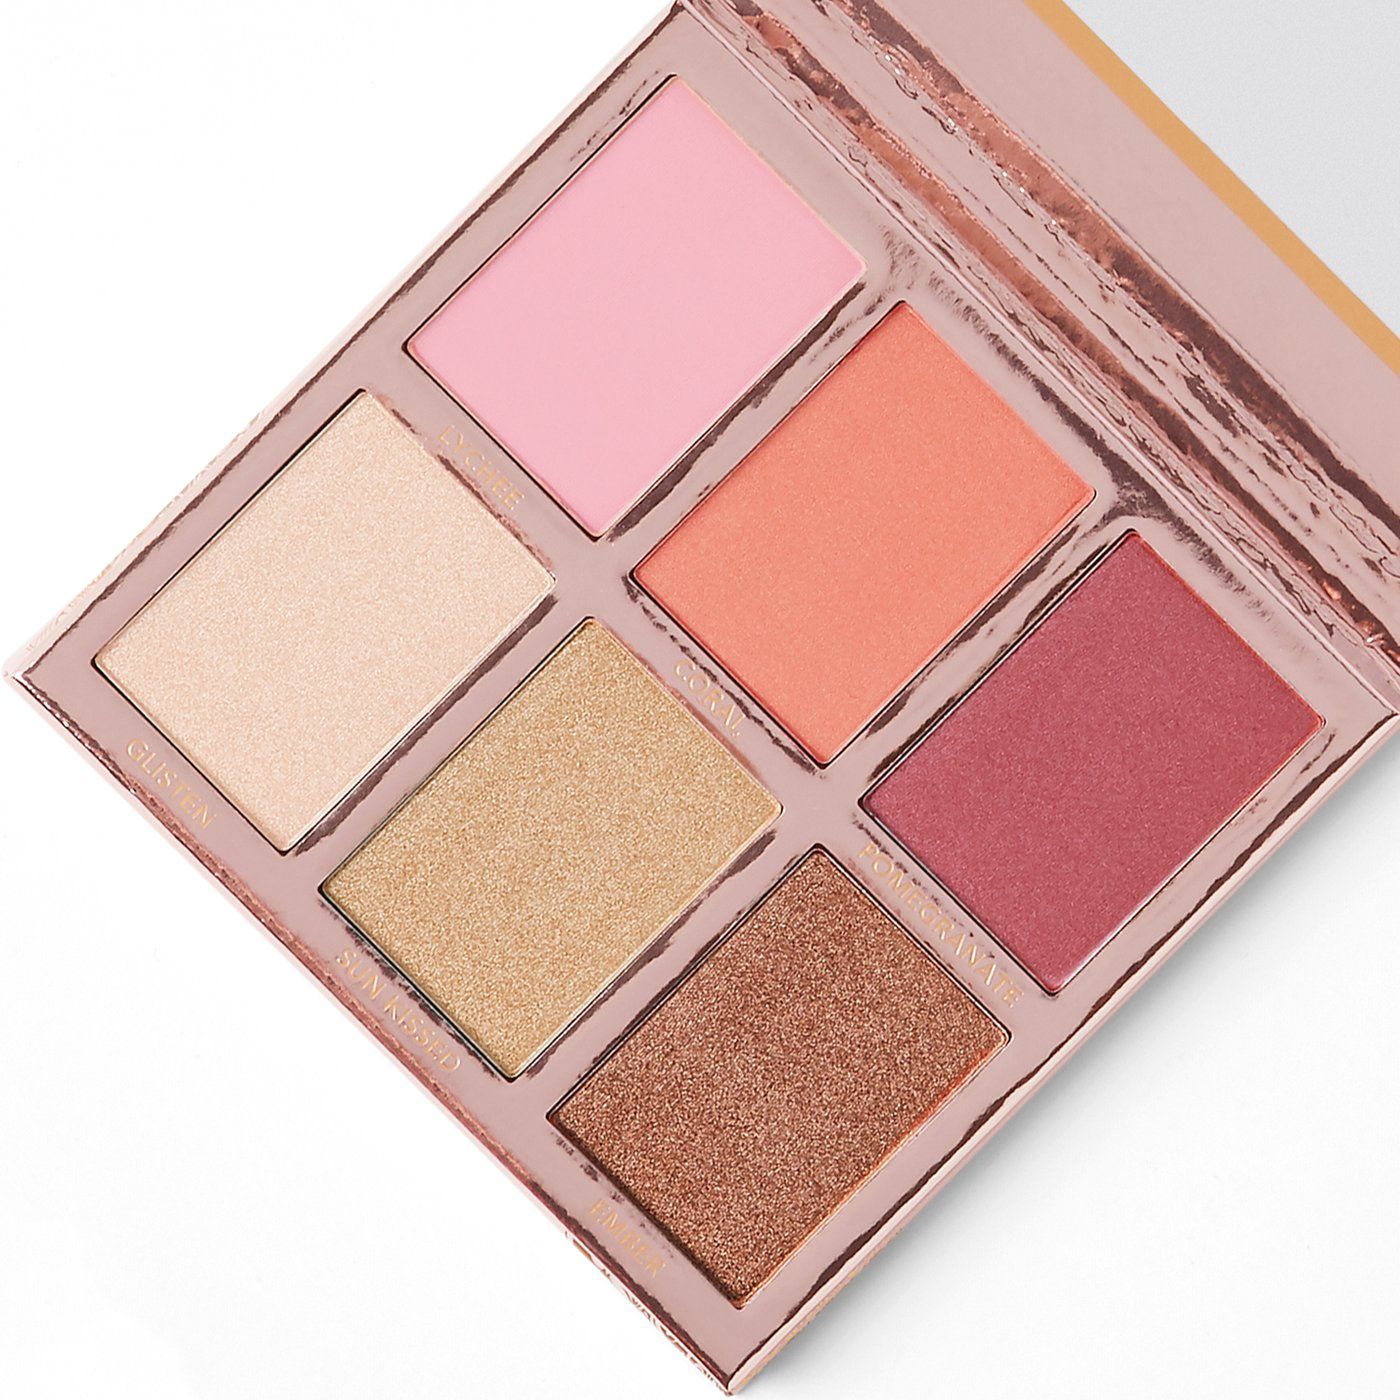 Blushing-In-Bali-6-Color-Blush-_-Highlighter-Palette-overhead-web_1400x1400